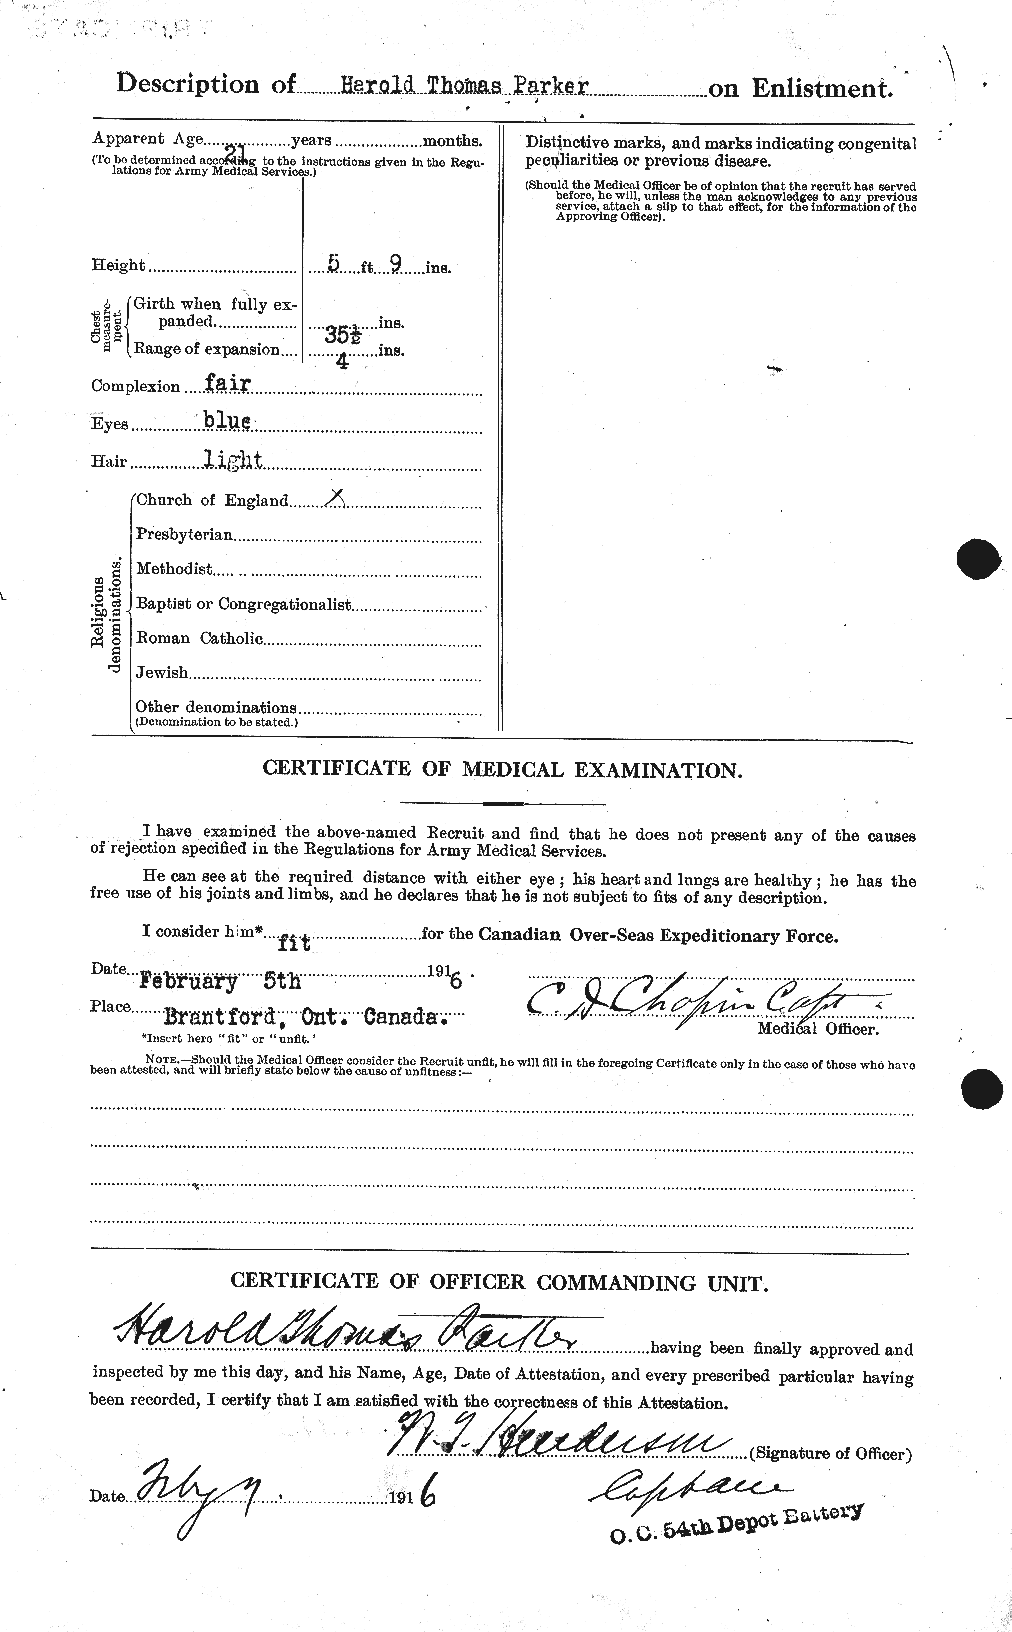 Personnel Records of the First World War - CEF 565312b